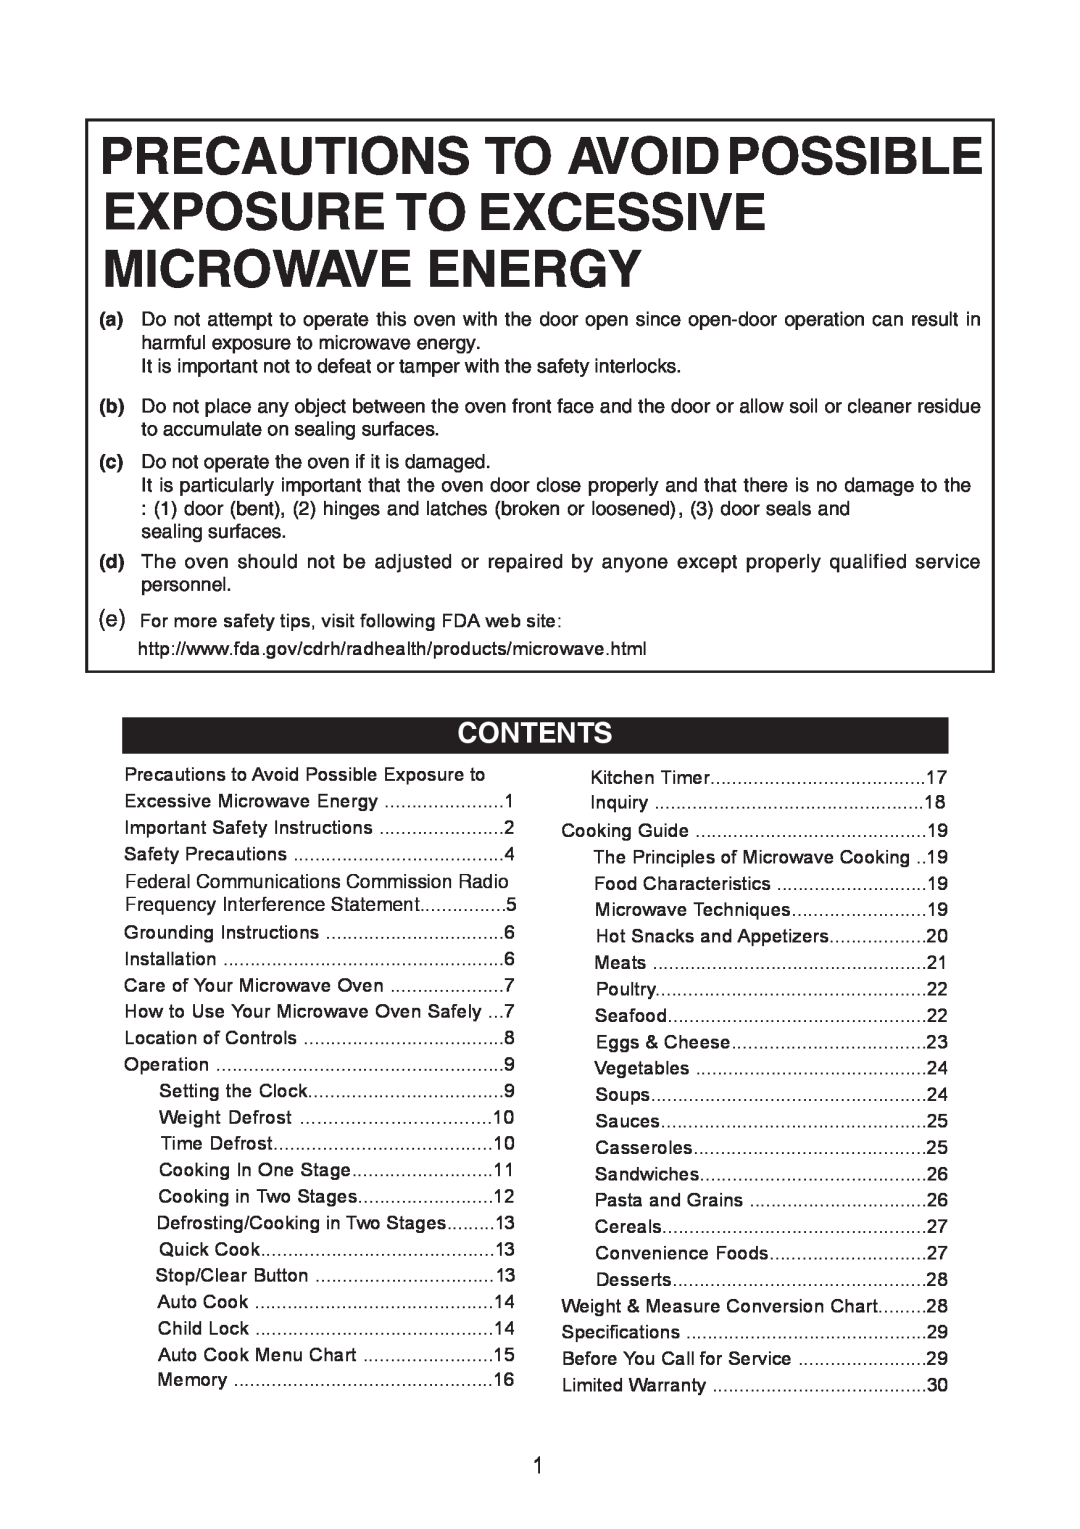 Emerson MW9325SL owner manual Contents, Precautions To Avoid Possible Exposure To Excessive Microwave Energy 